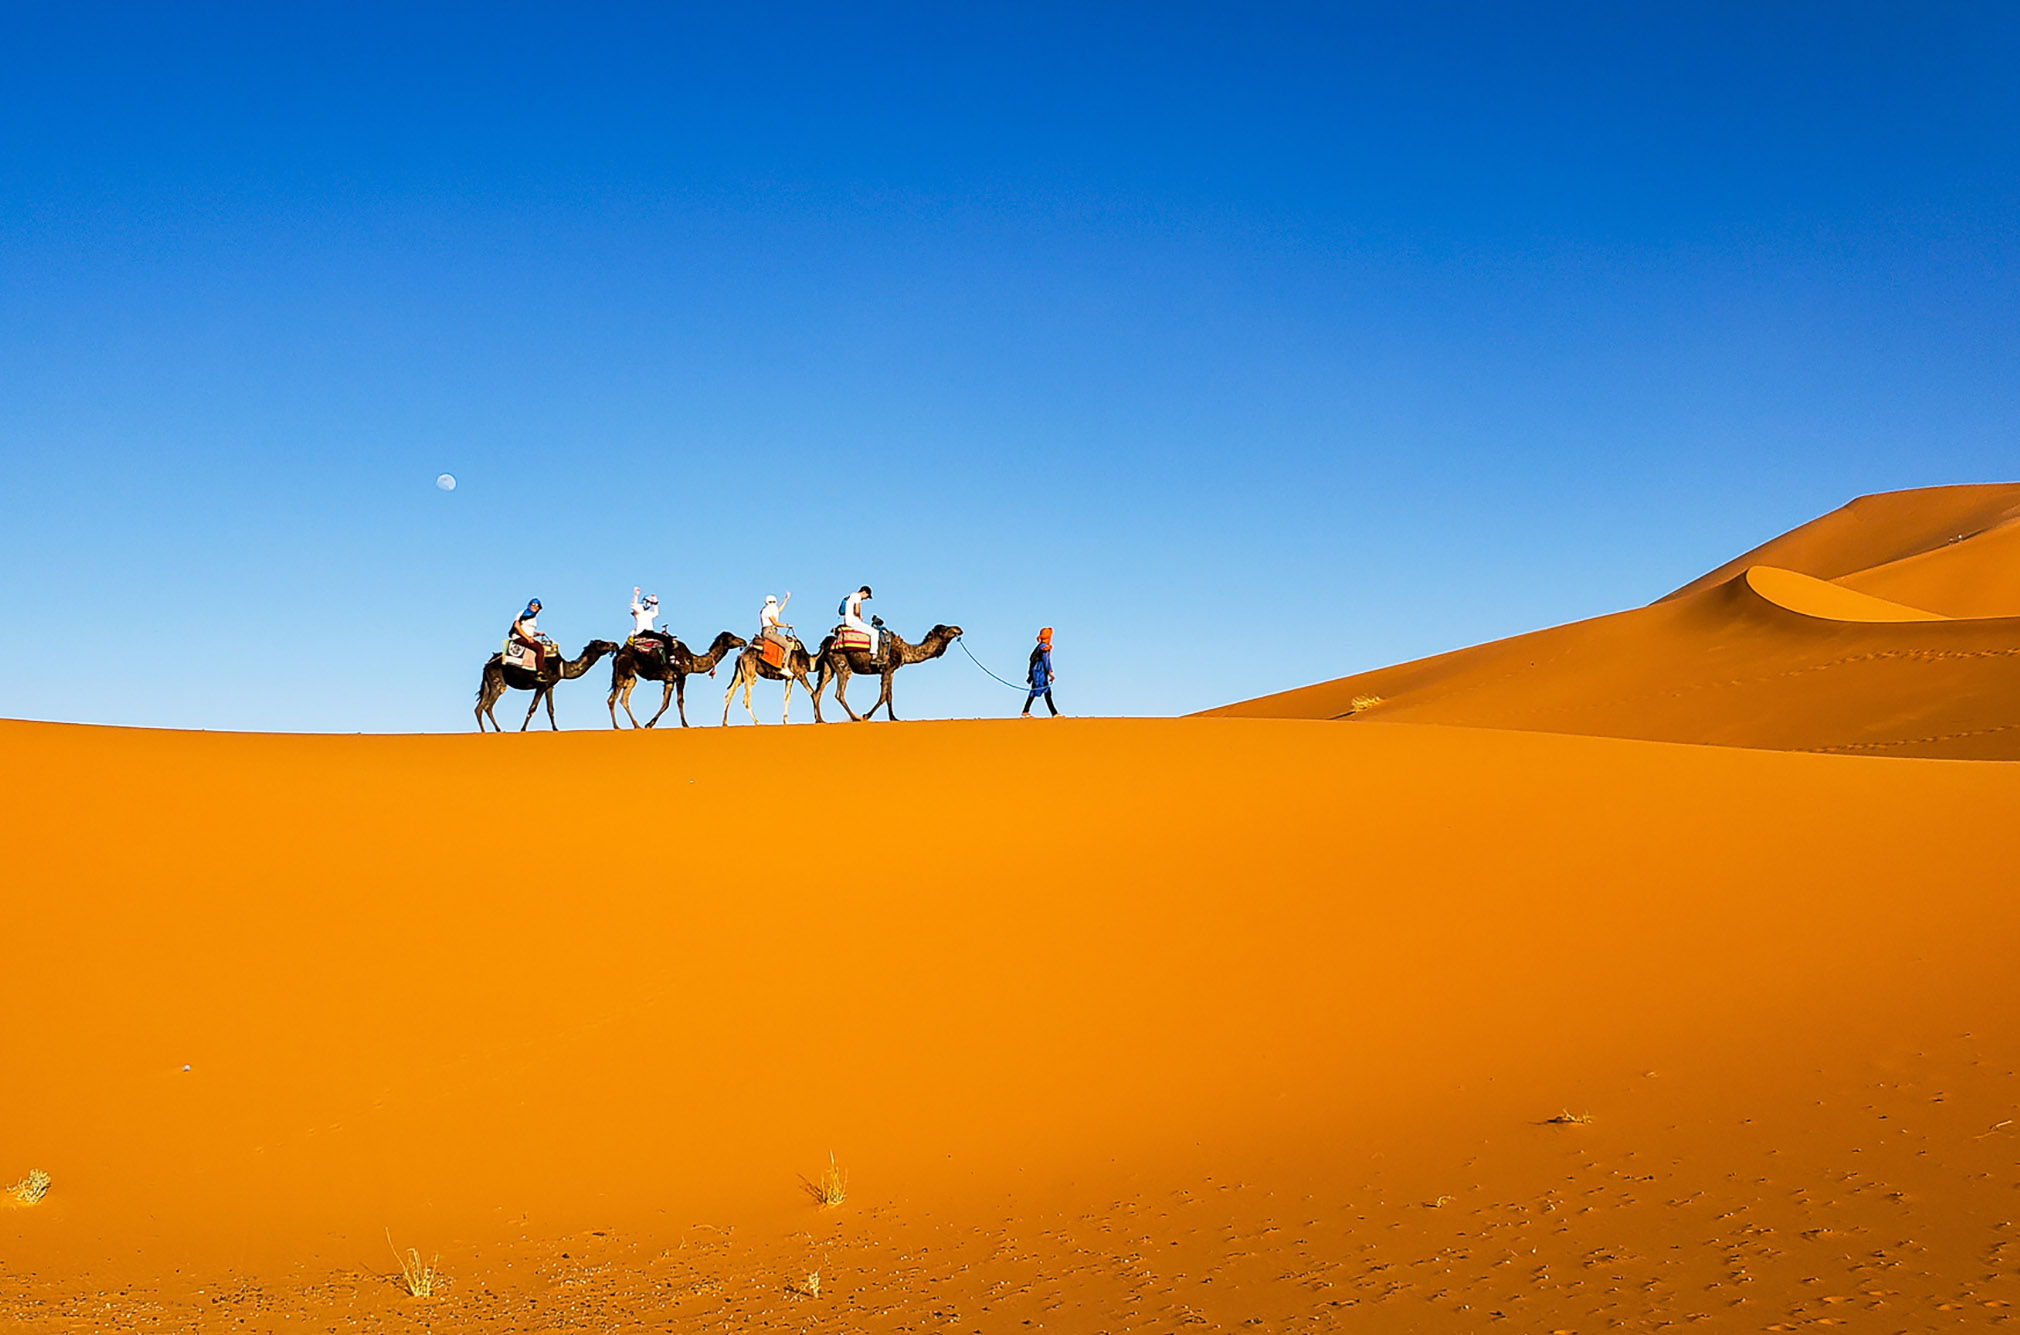 Photo: A wide shot of people riding on camels in a desert, four of them riding and one leading them across. The sky is a bright blue and the sand a deep orange.